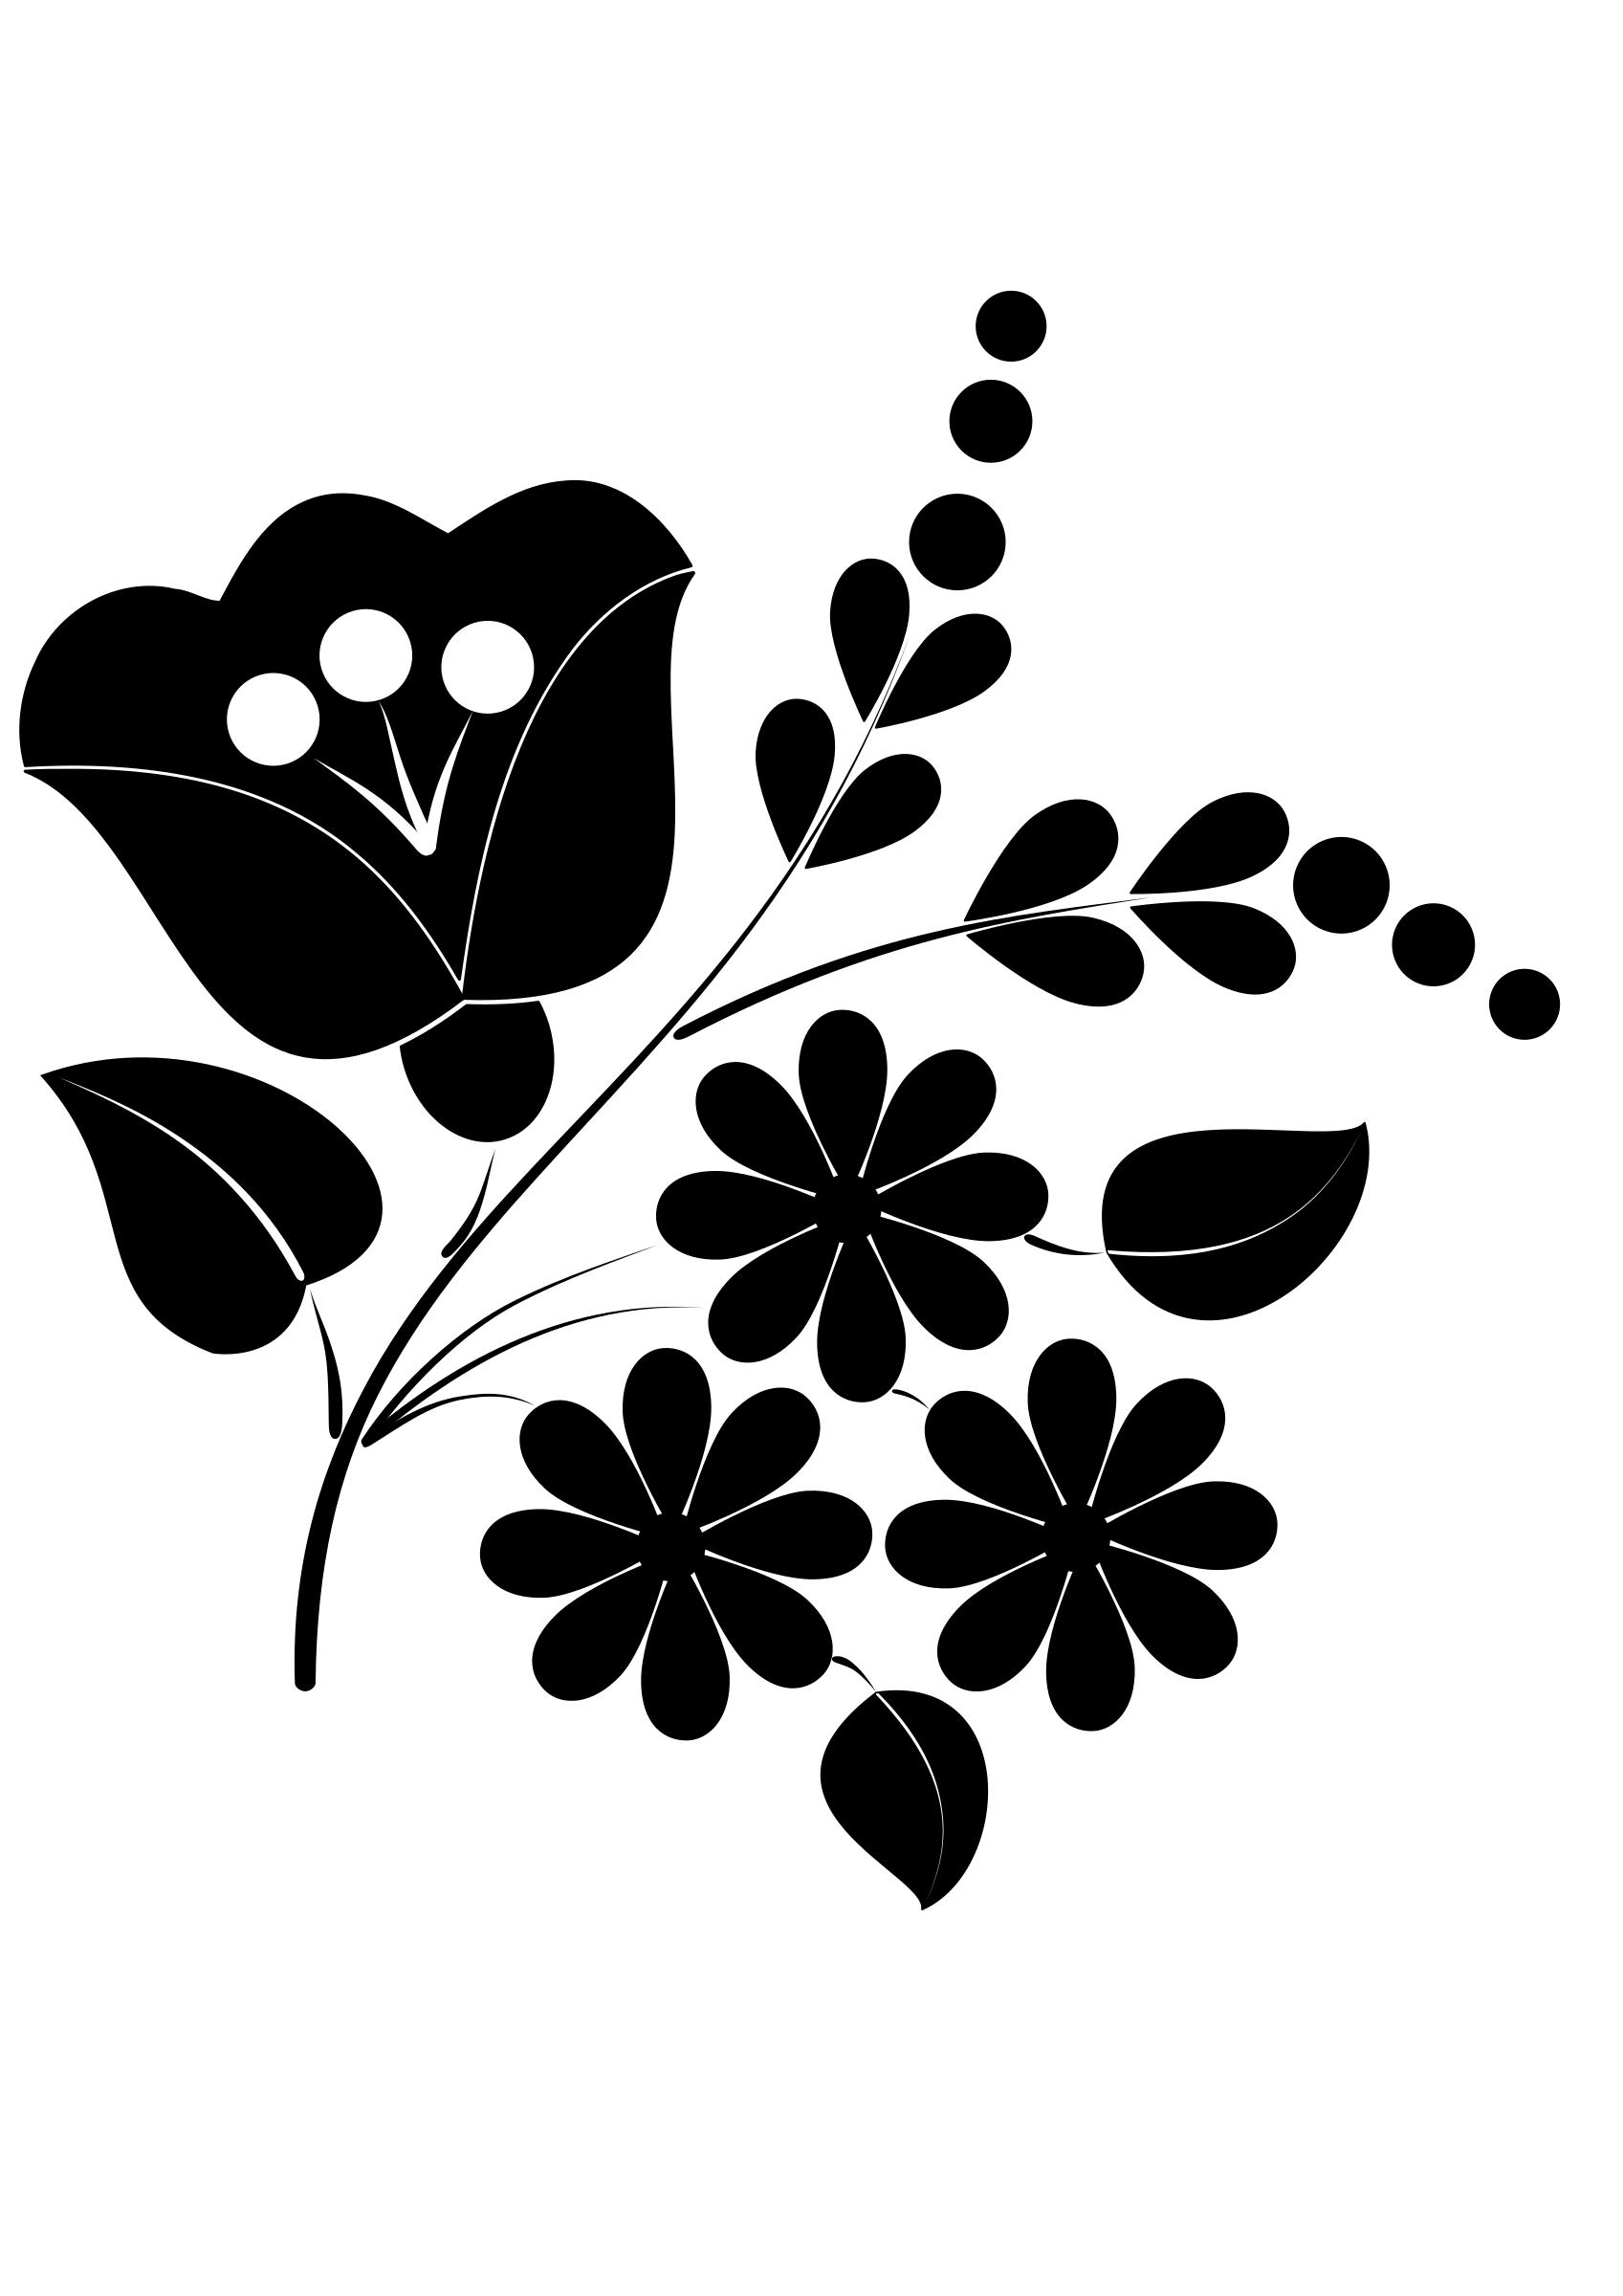 Flower ornament folk art Icons PNG - Free PNG and Icons Downloads